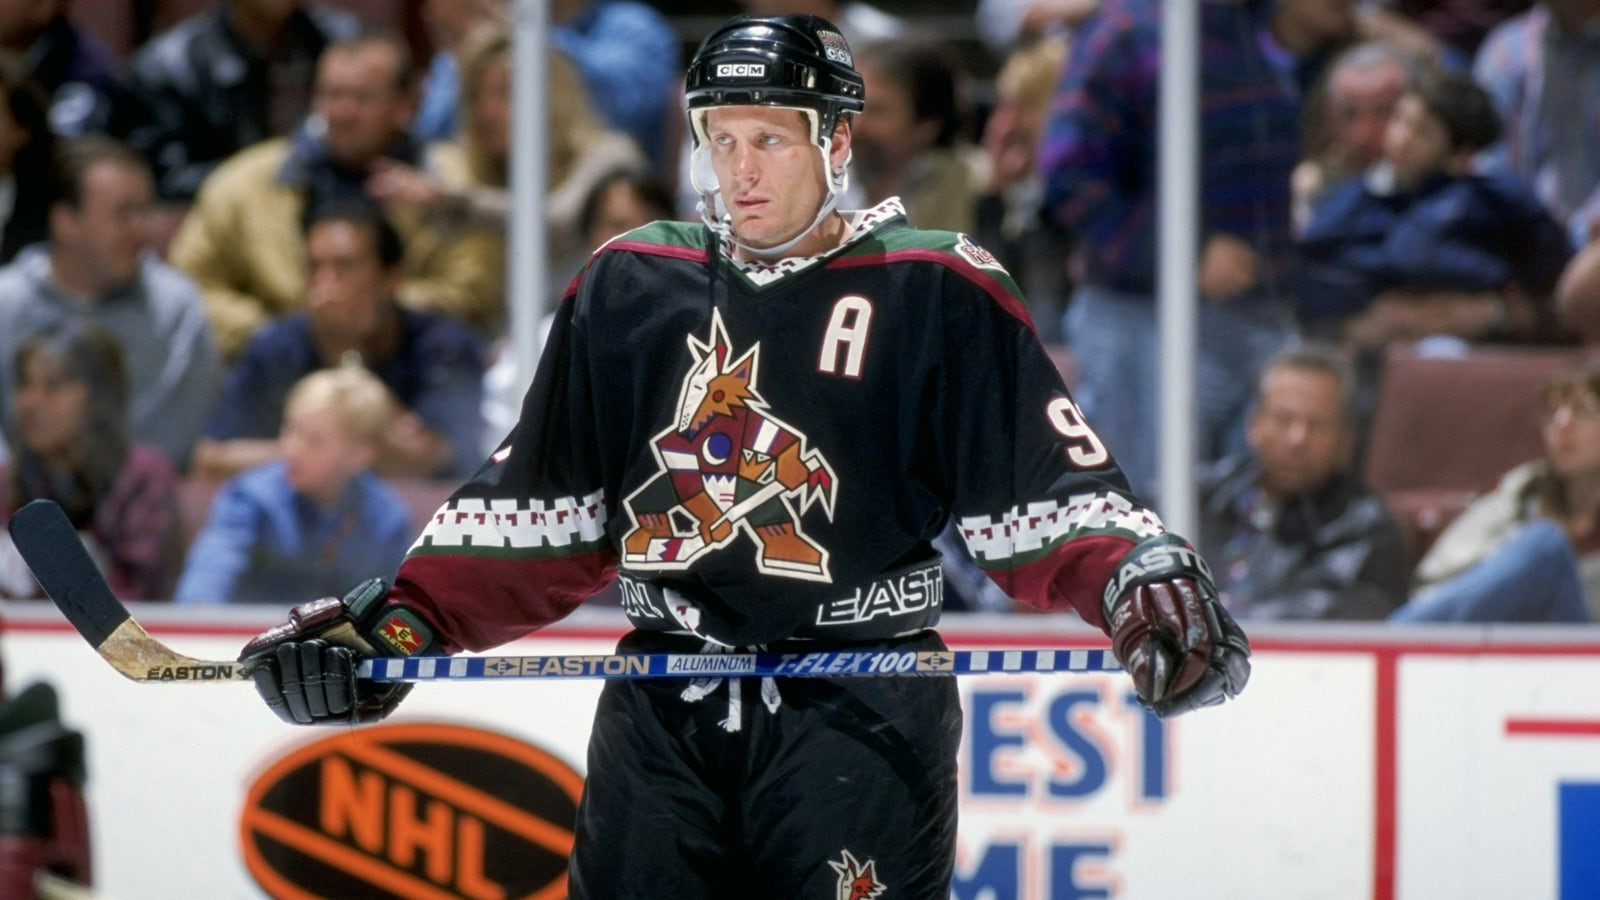 roenick coyotes jersey